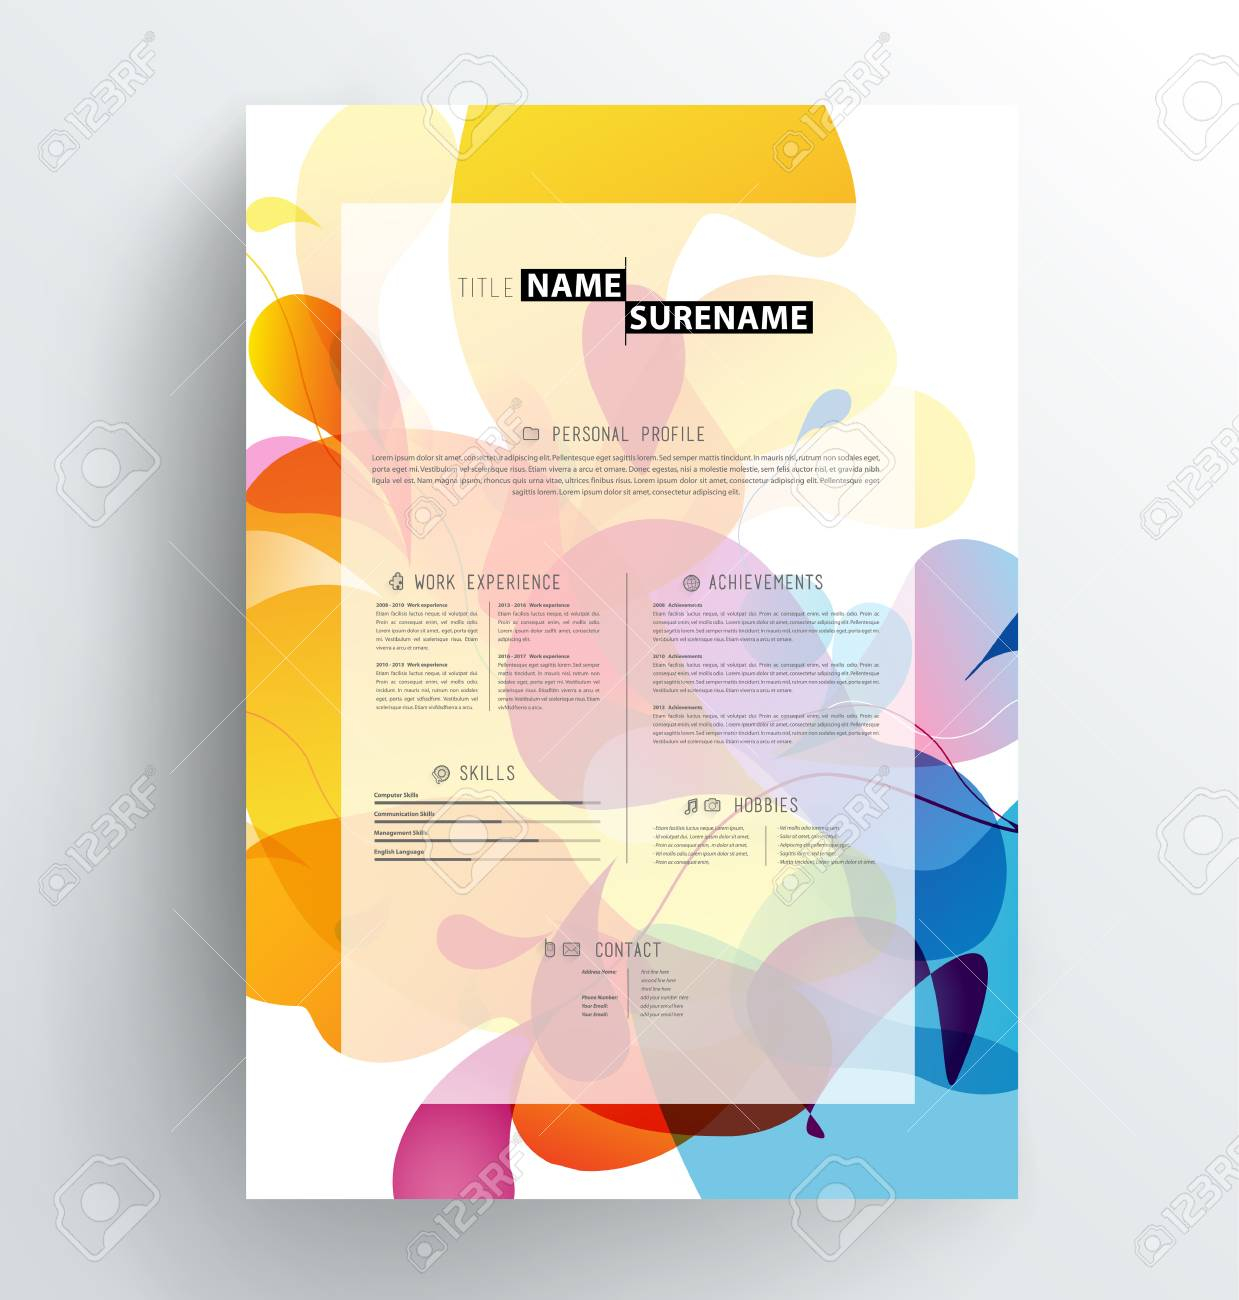 Colorful Resume Template Debandje within dimensions 1239 X 1300